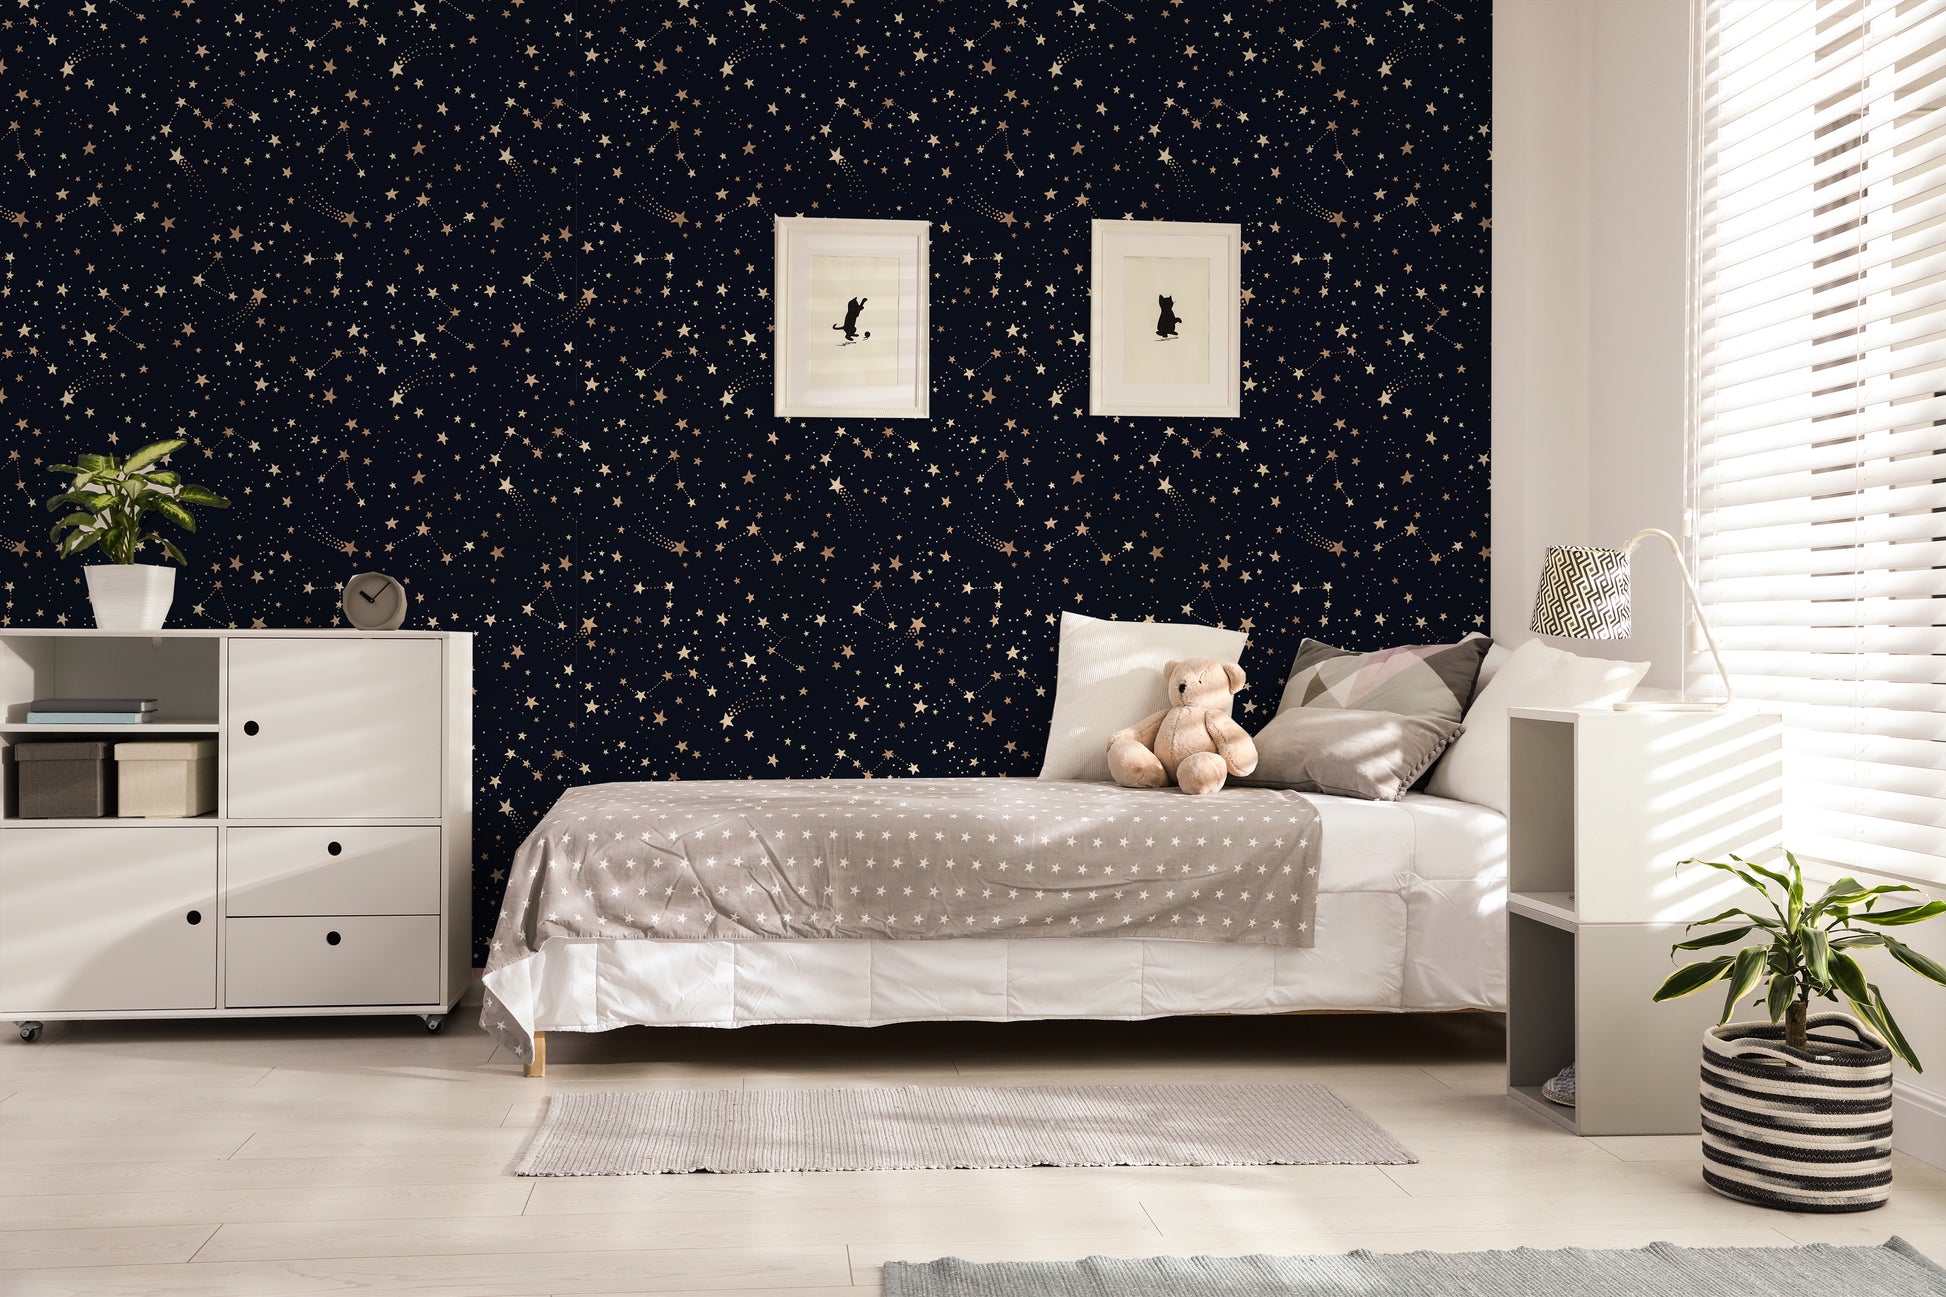 Childs bedroom featuring peel and stick star wallpaper